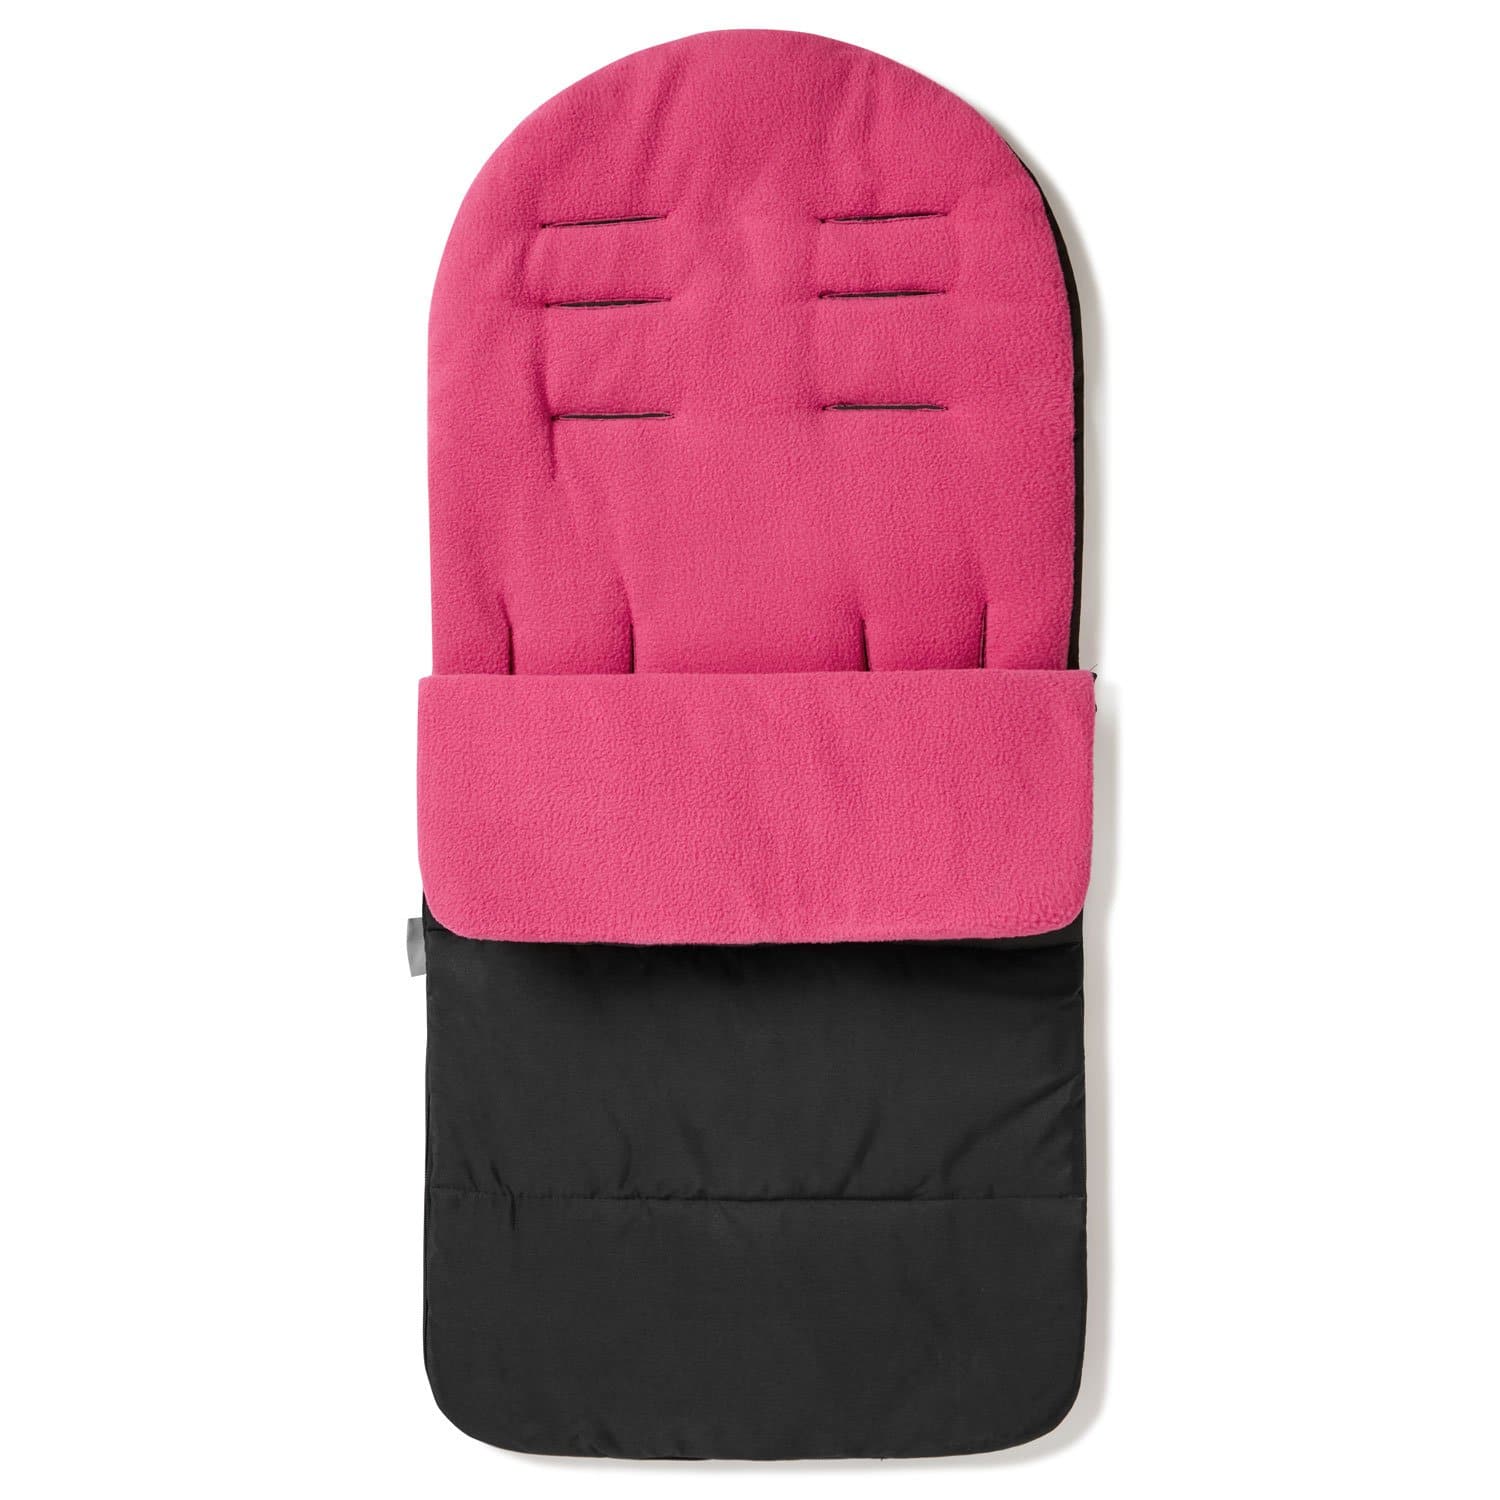 Premium Footmuff / Cosy Toes Compatible with Silver Cross - Pink Rose / Fits All Models | For Your Little One